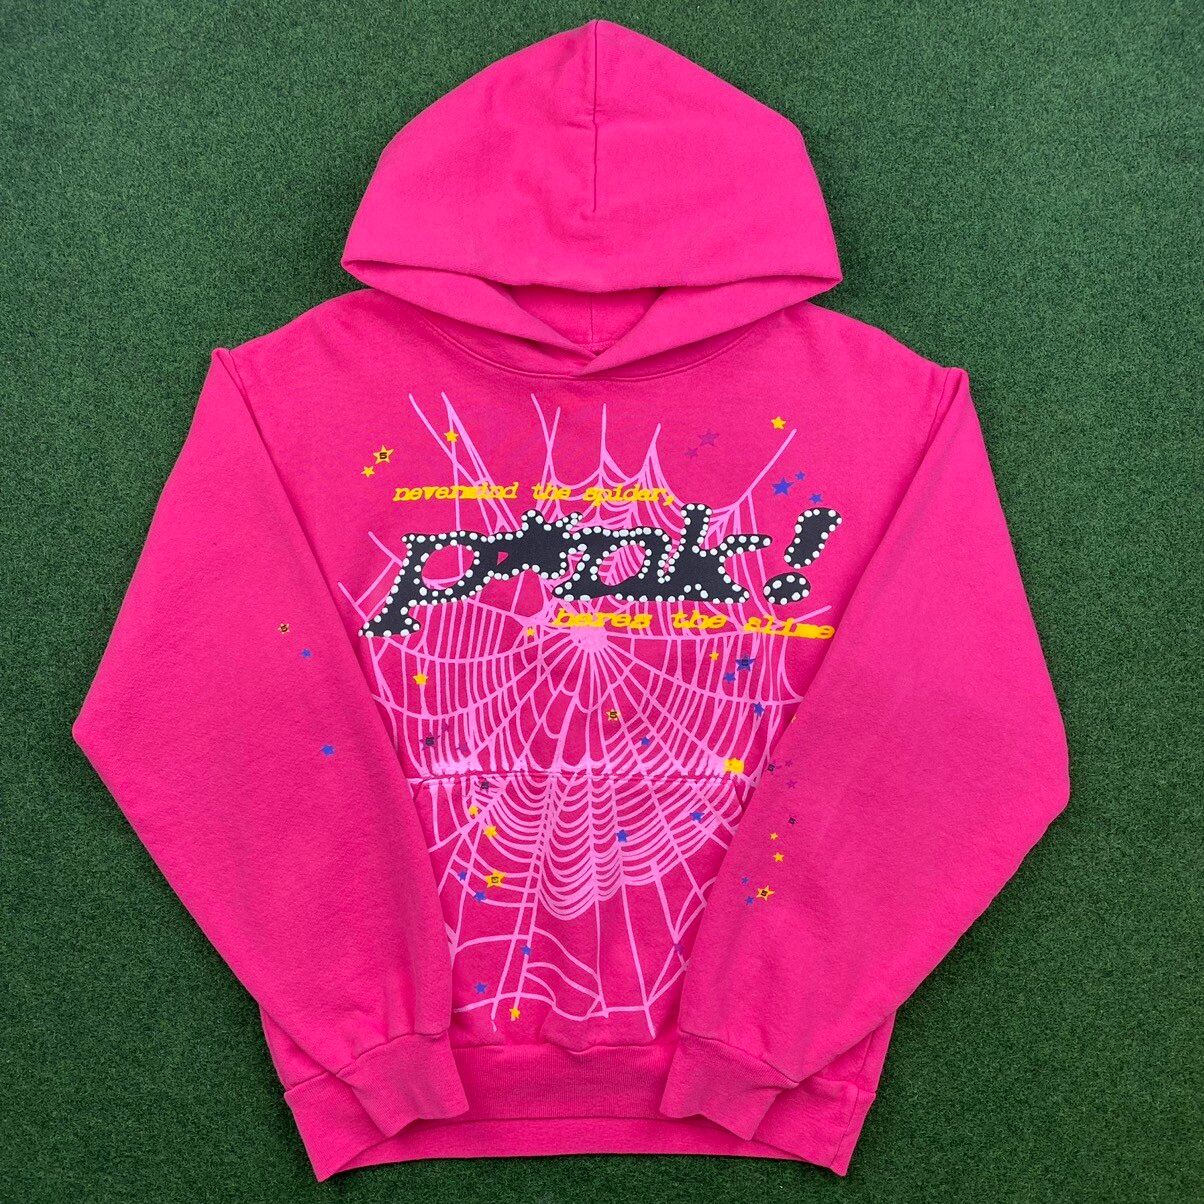 Spider Worldwide Spider Punk Hoodie Young Thug Size US S / EU 44-46 / 1 - 1 Preview